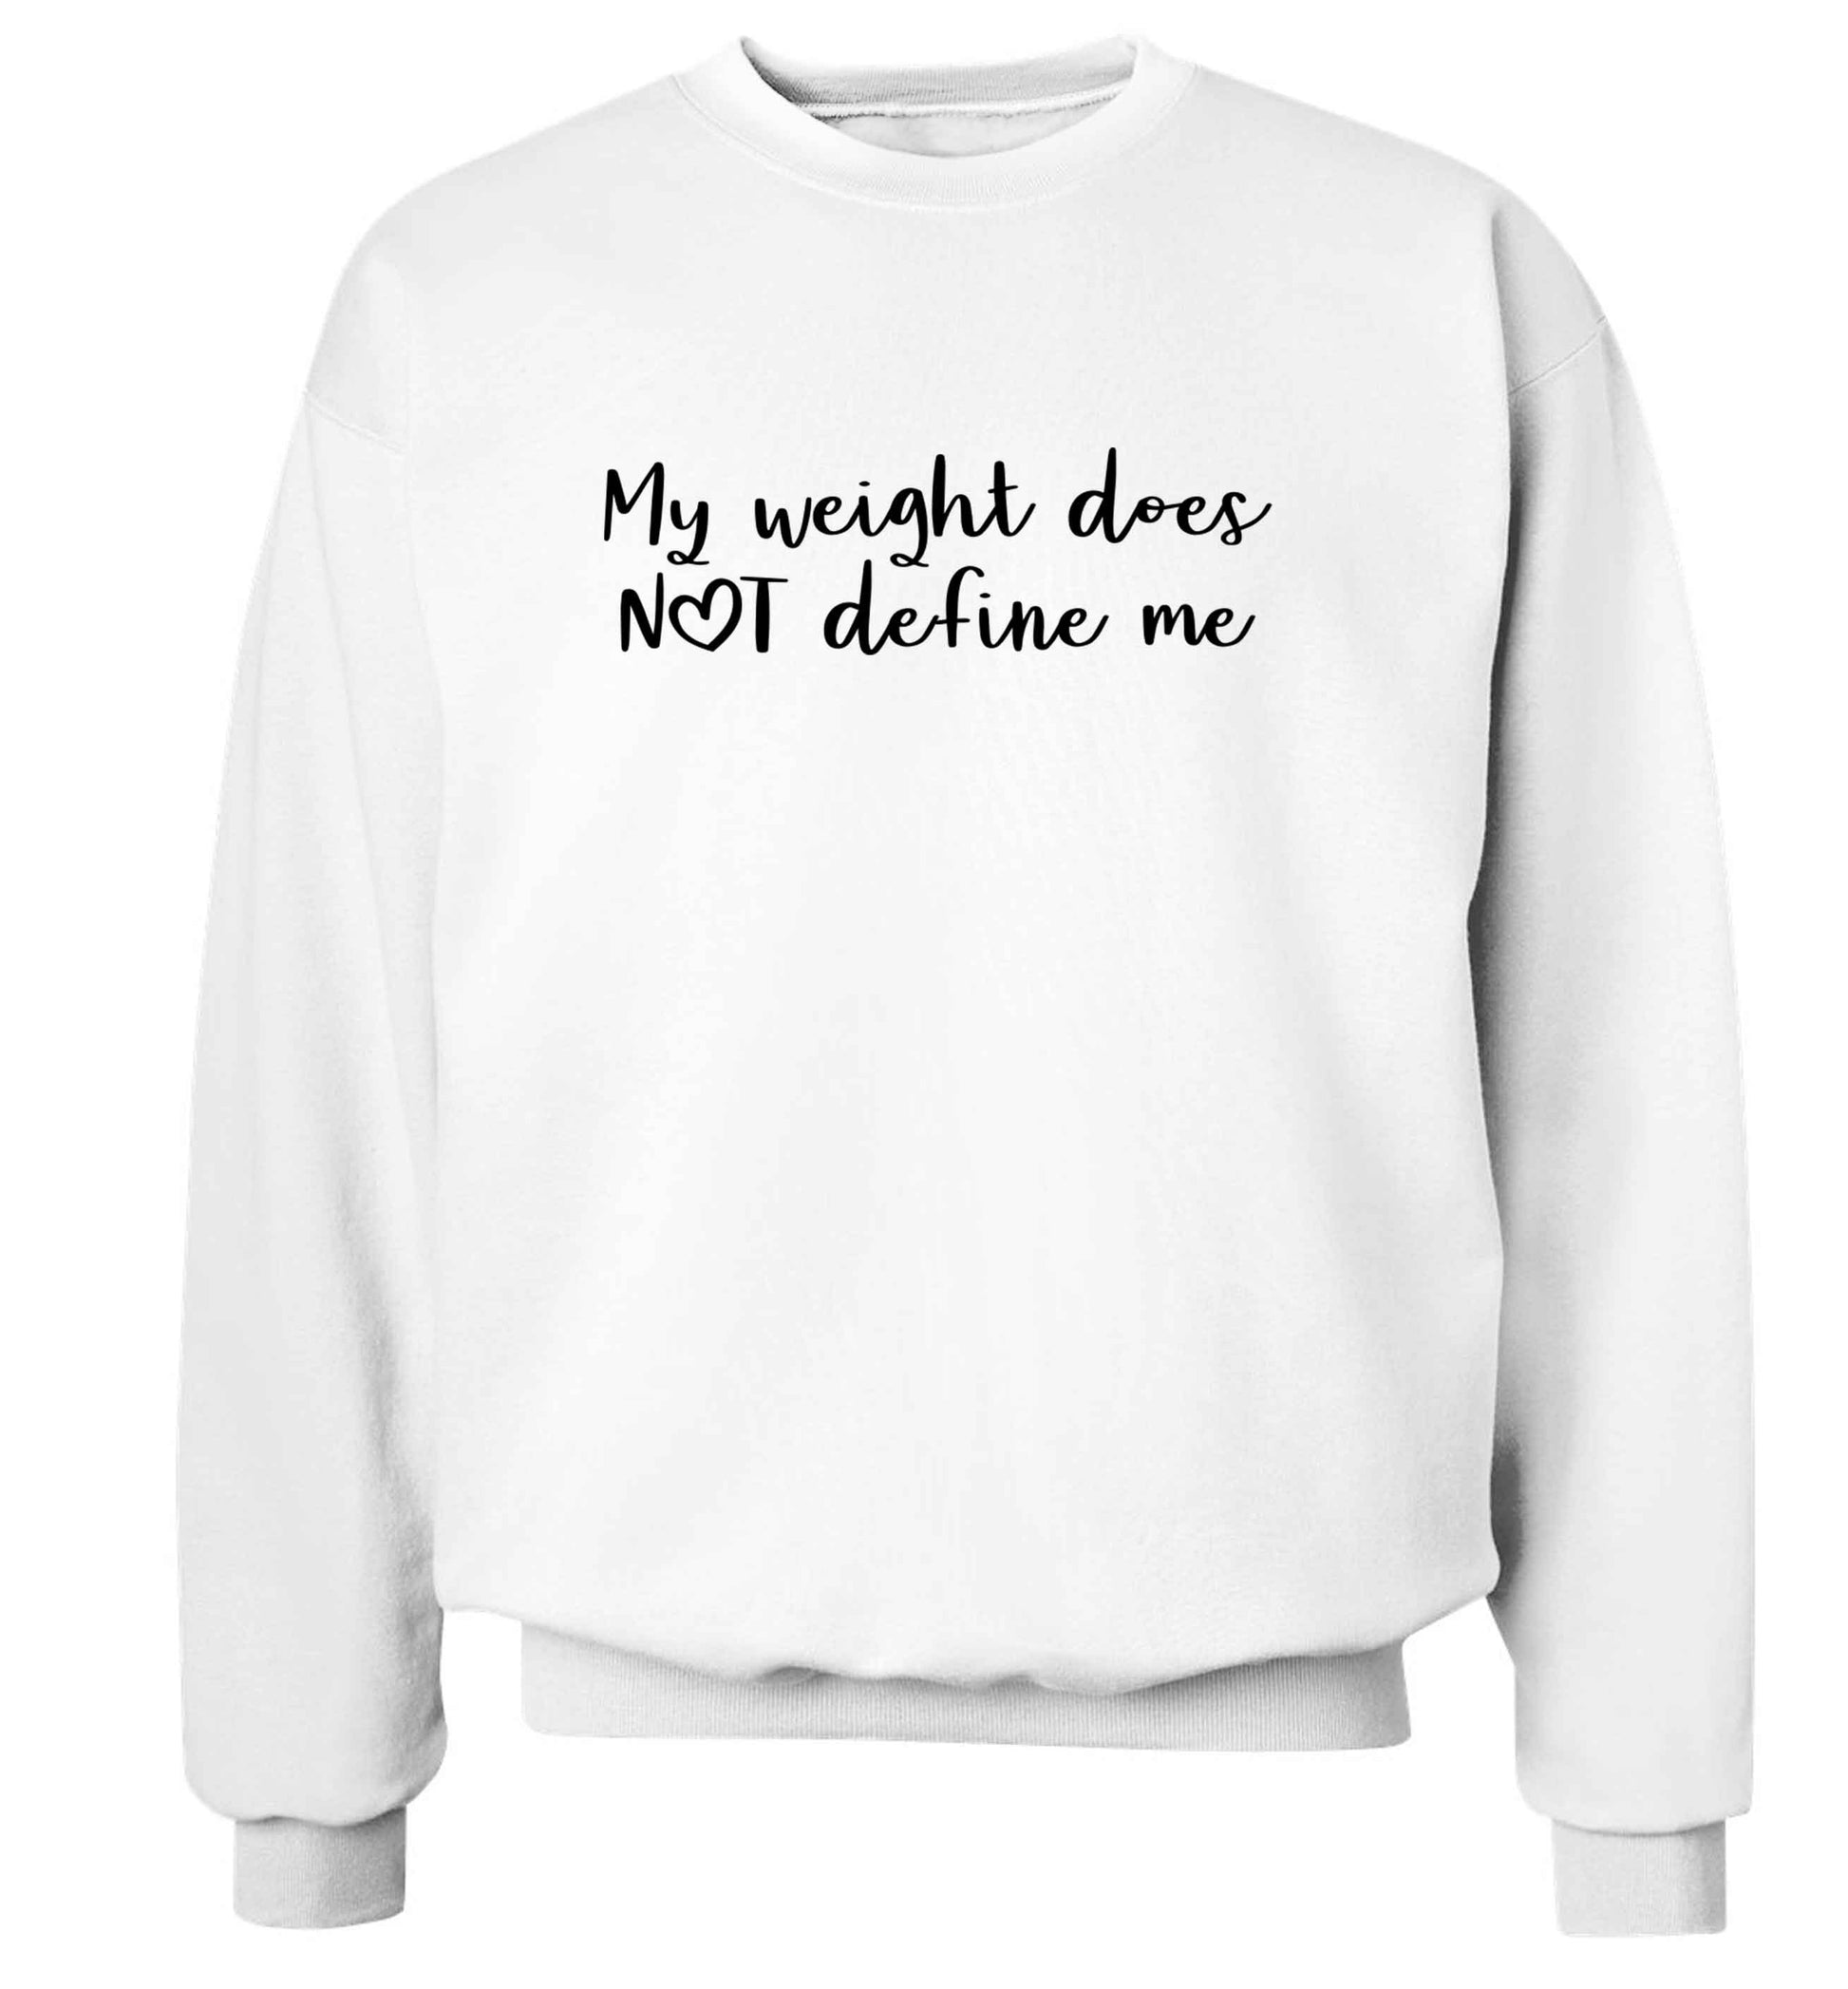 My weight does not define me adult's unisex white sweater 2XL